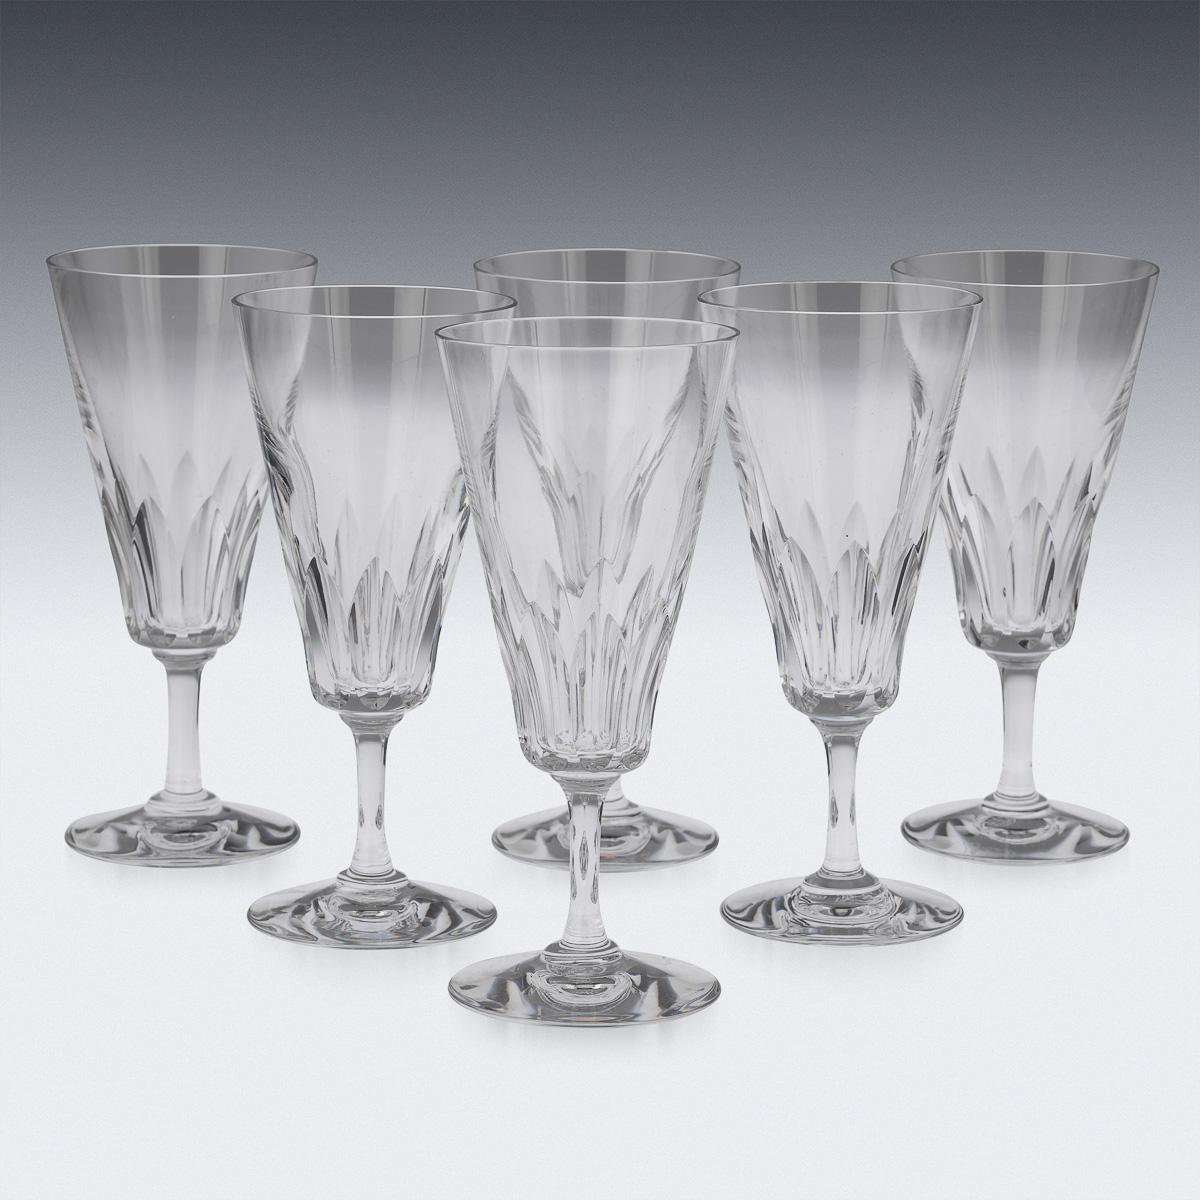 Complete Set Of 36 Drinking Glasses By Baccarat, France, c.1960 10